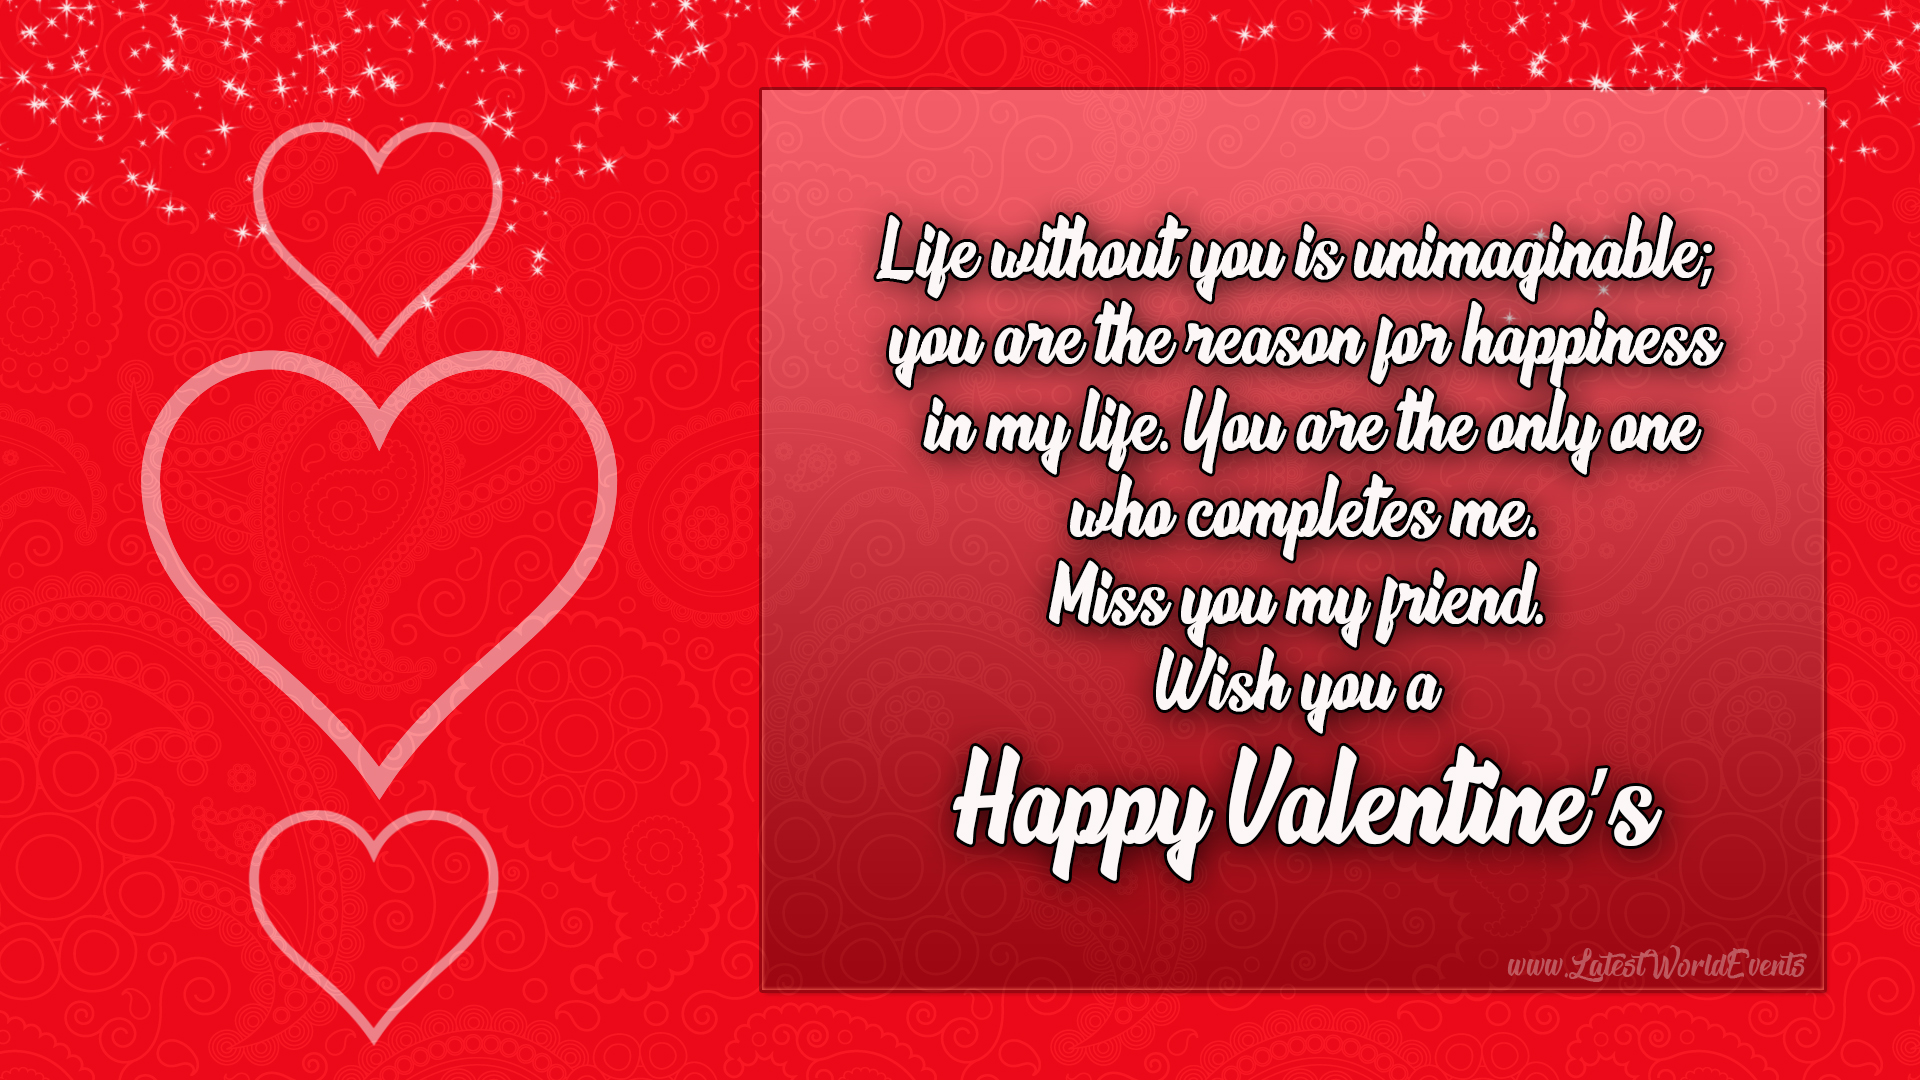 Download-love-message-for-wife-from-husband